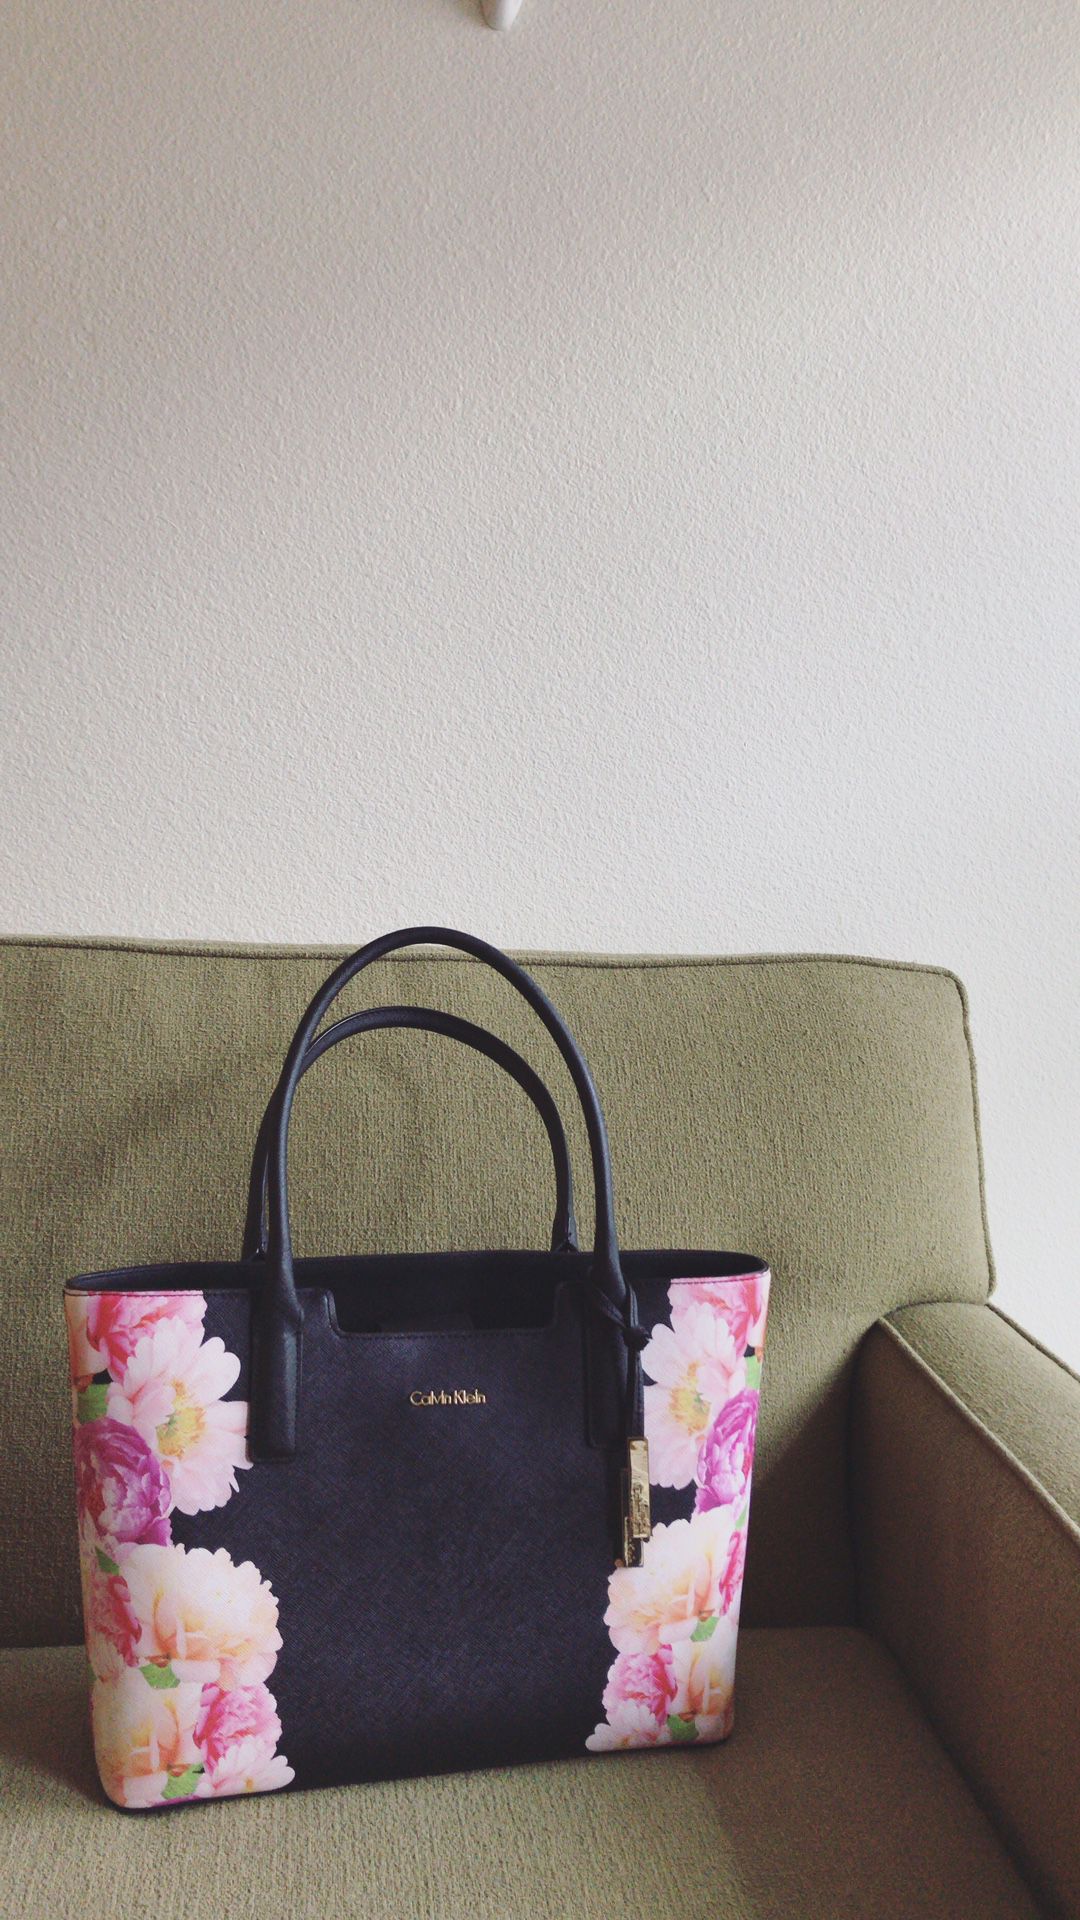 Klein NWOT Saffiano Tote Bag for Sale in San Jose, CA - OfferUp